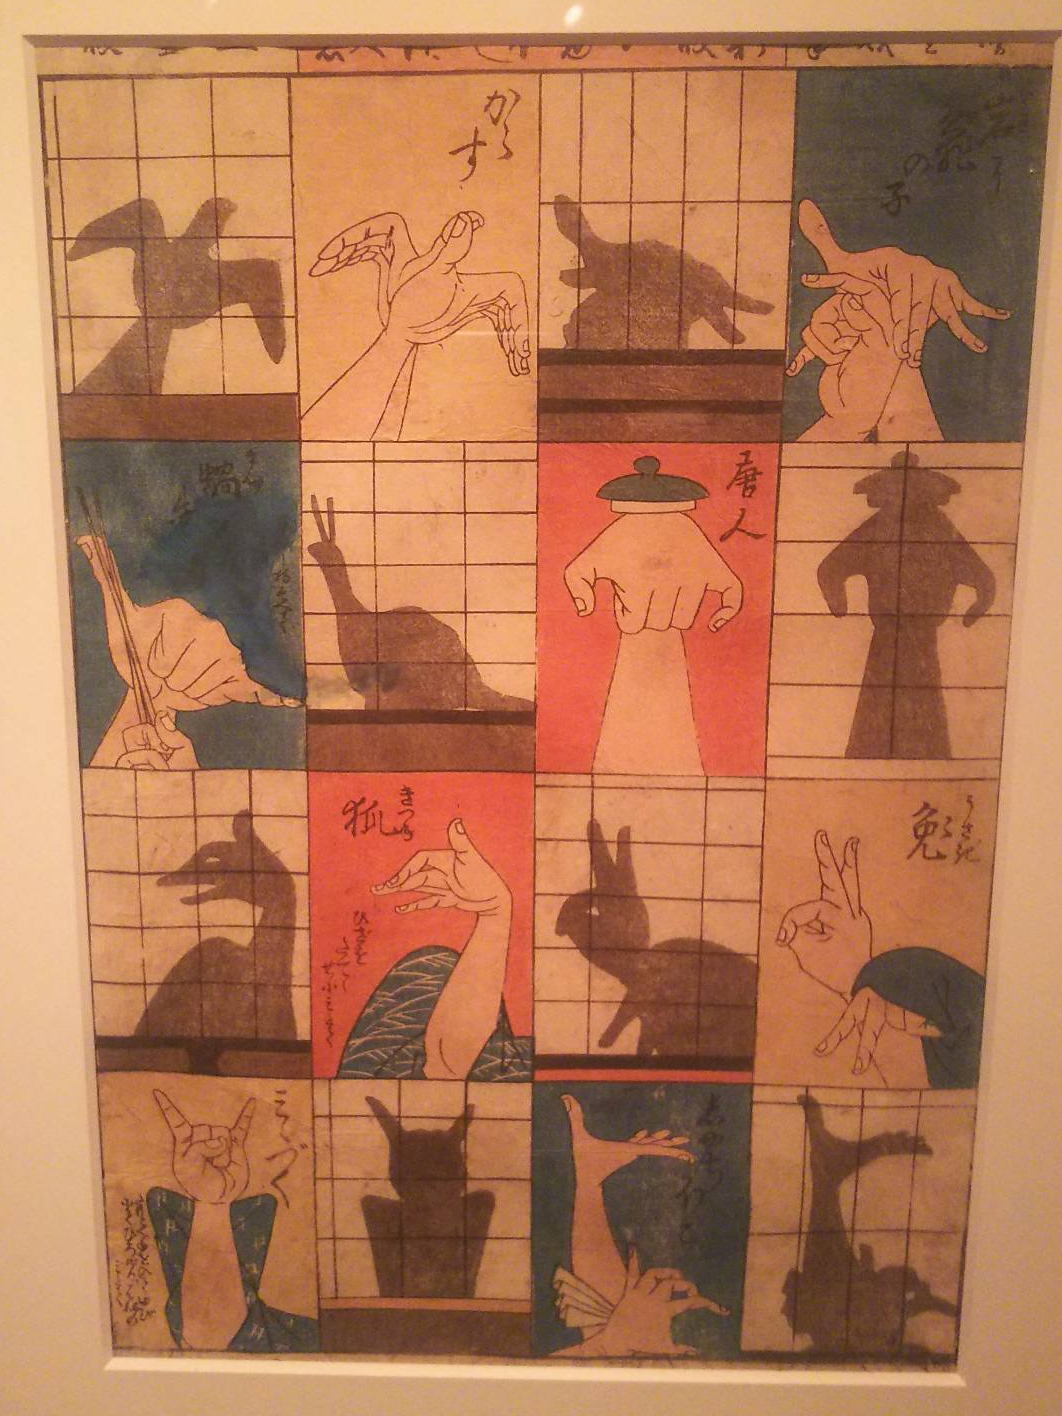 A Japanese guide to shadow puppets circa 1840